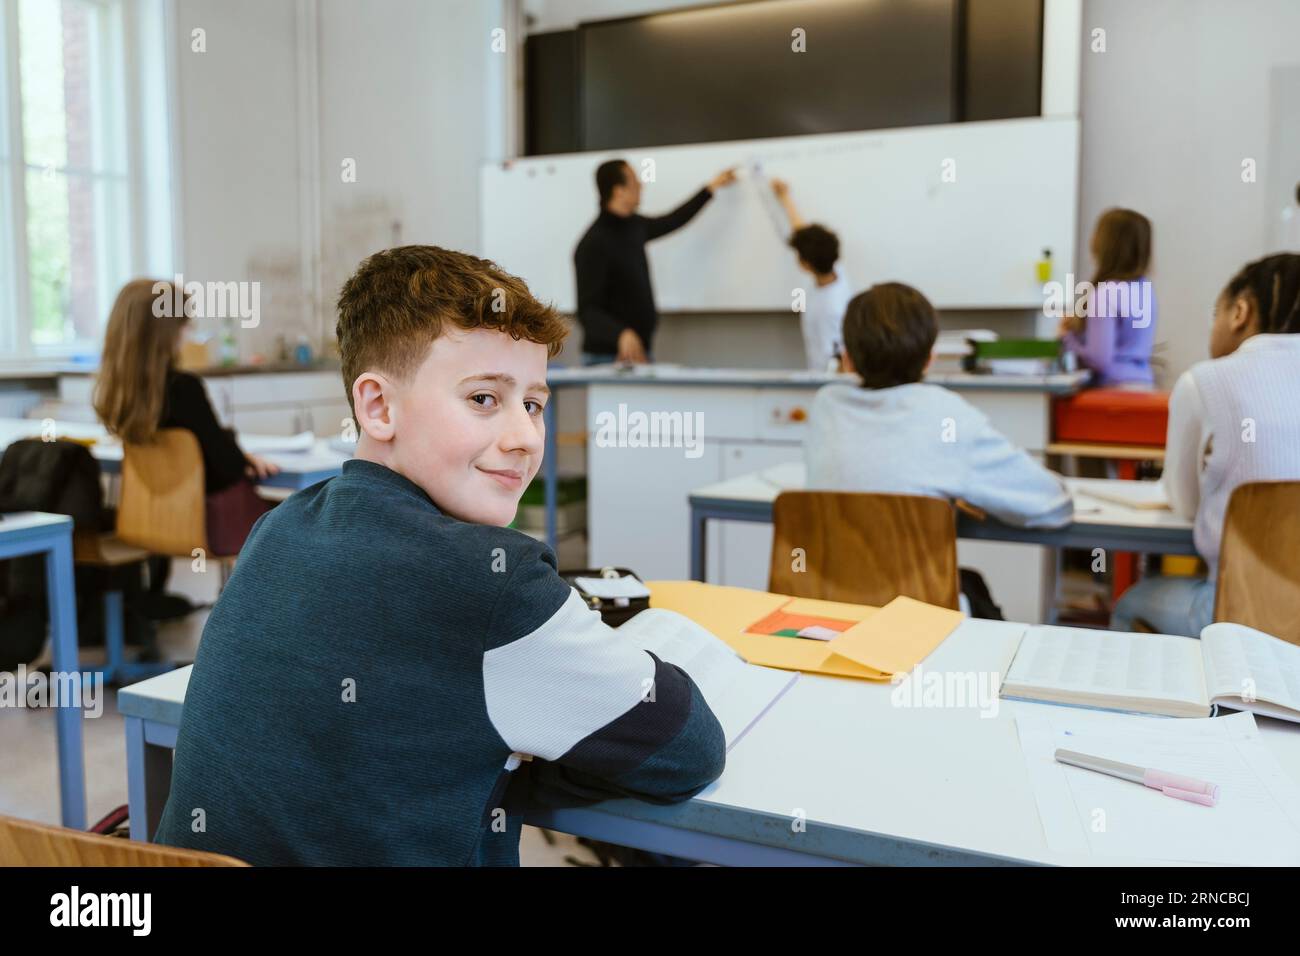 Portrait of smiling boy looking over shoulder while sitting on desk in classroom Stock Photo